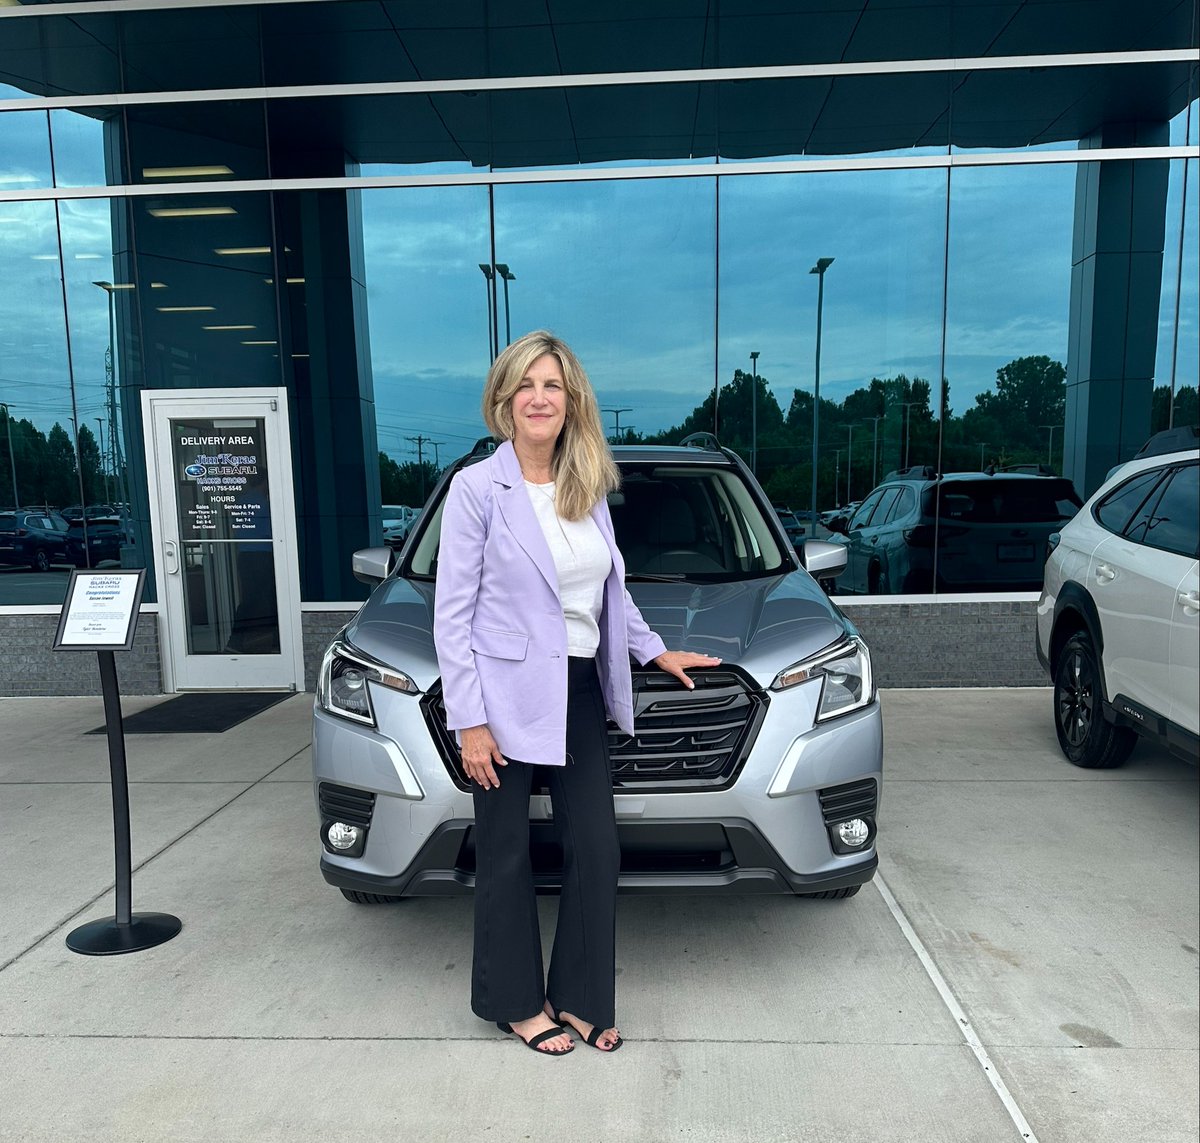 Congratulations Susan Jewell on your new 2023 Subaru Forester with assistance from Product Specialist Caden Hubbard!

 #JKSHC #JimKeras #Jimkerashc #jimkerassubaruhackscross #subaruhackscross #subaru #memphis #midsouth